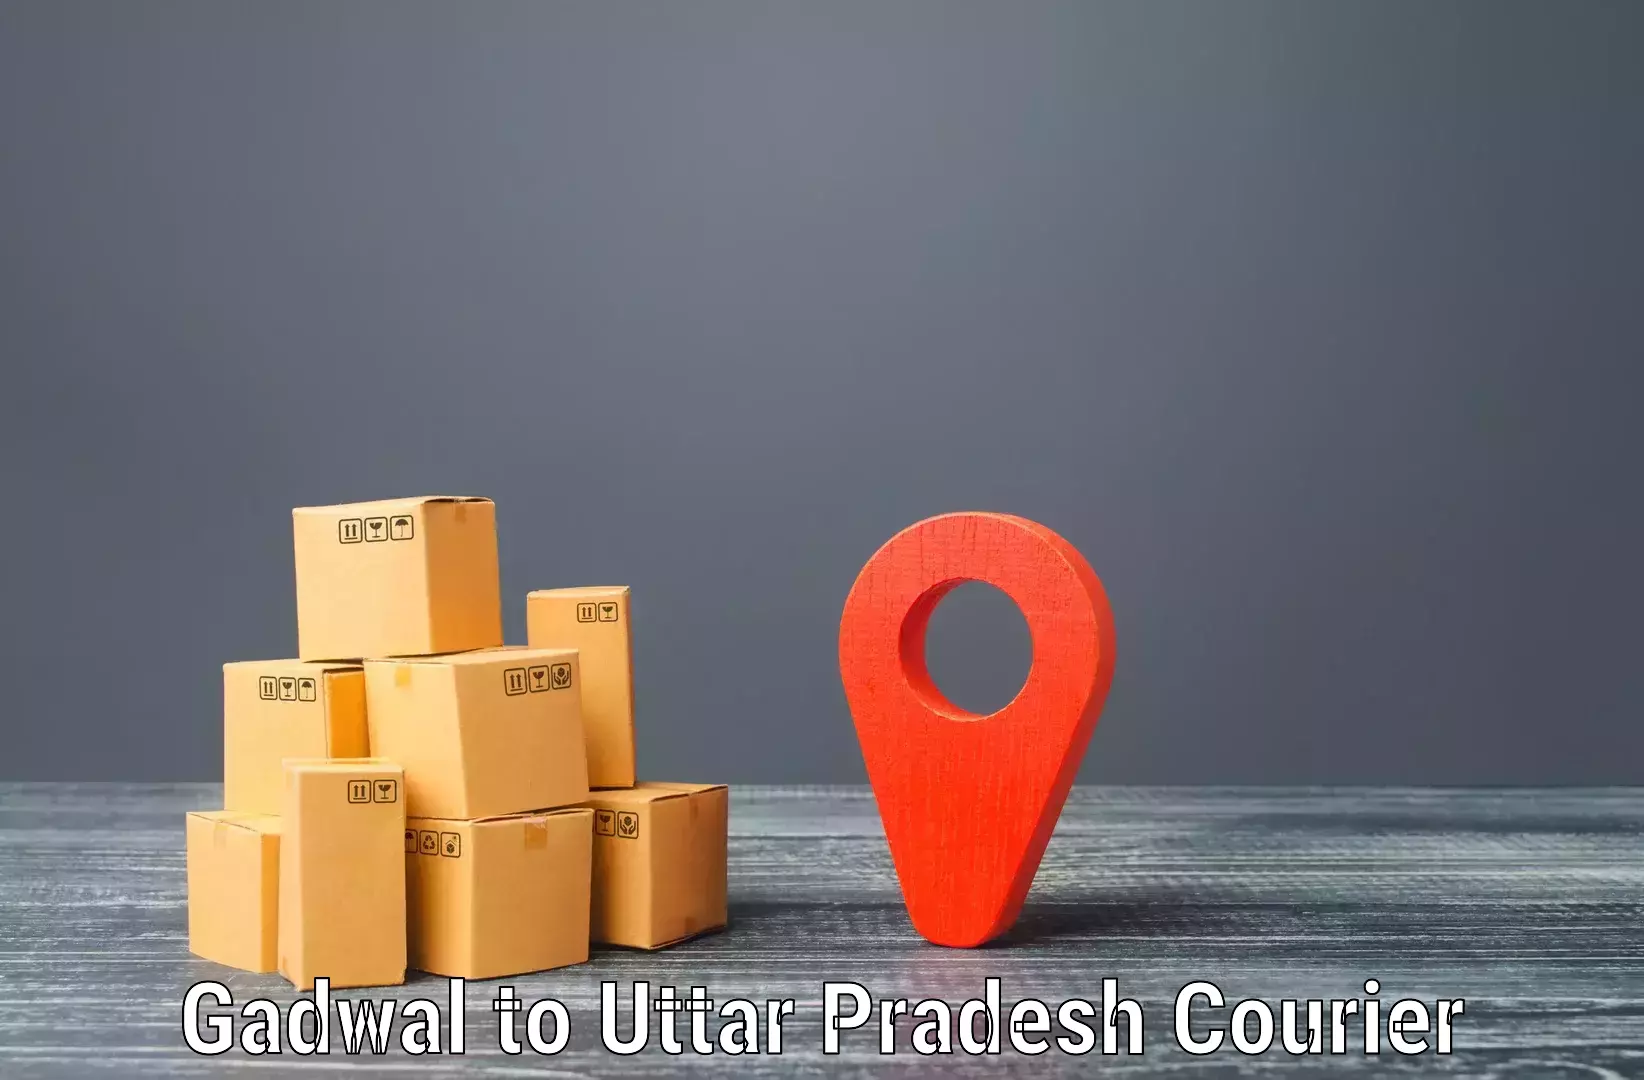 Online shipping calculator Gadwal to Lucknow